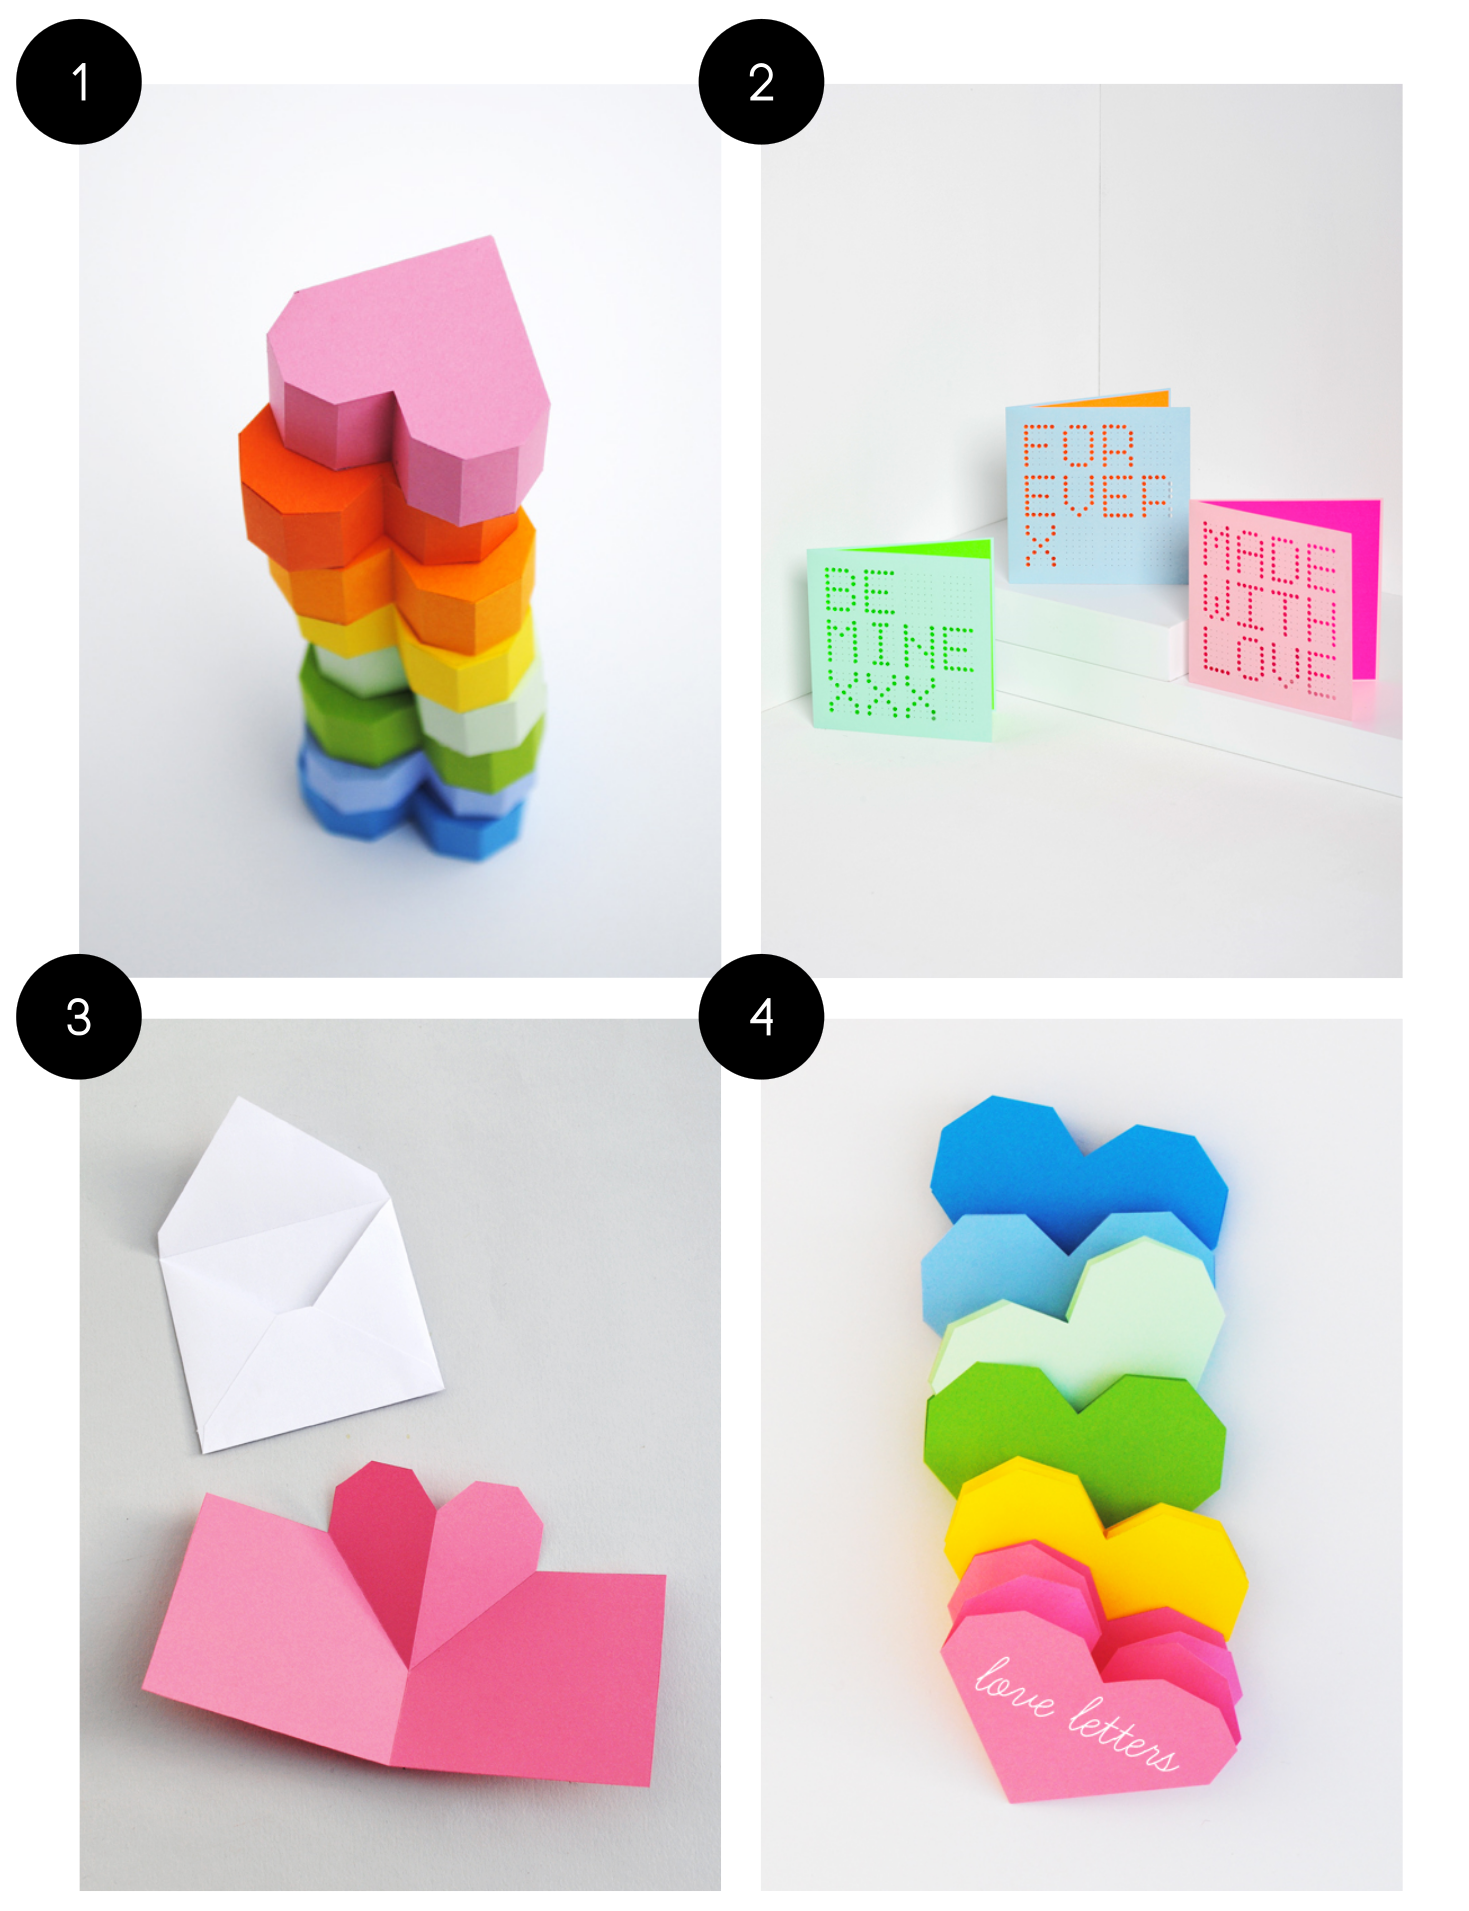 Custom DIY Card Origami Kit With Colorful Paper Hearts, Do It